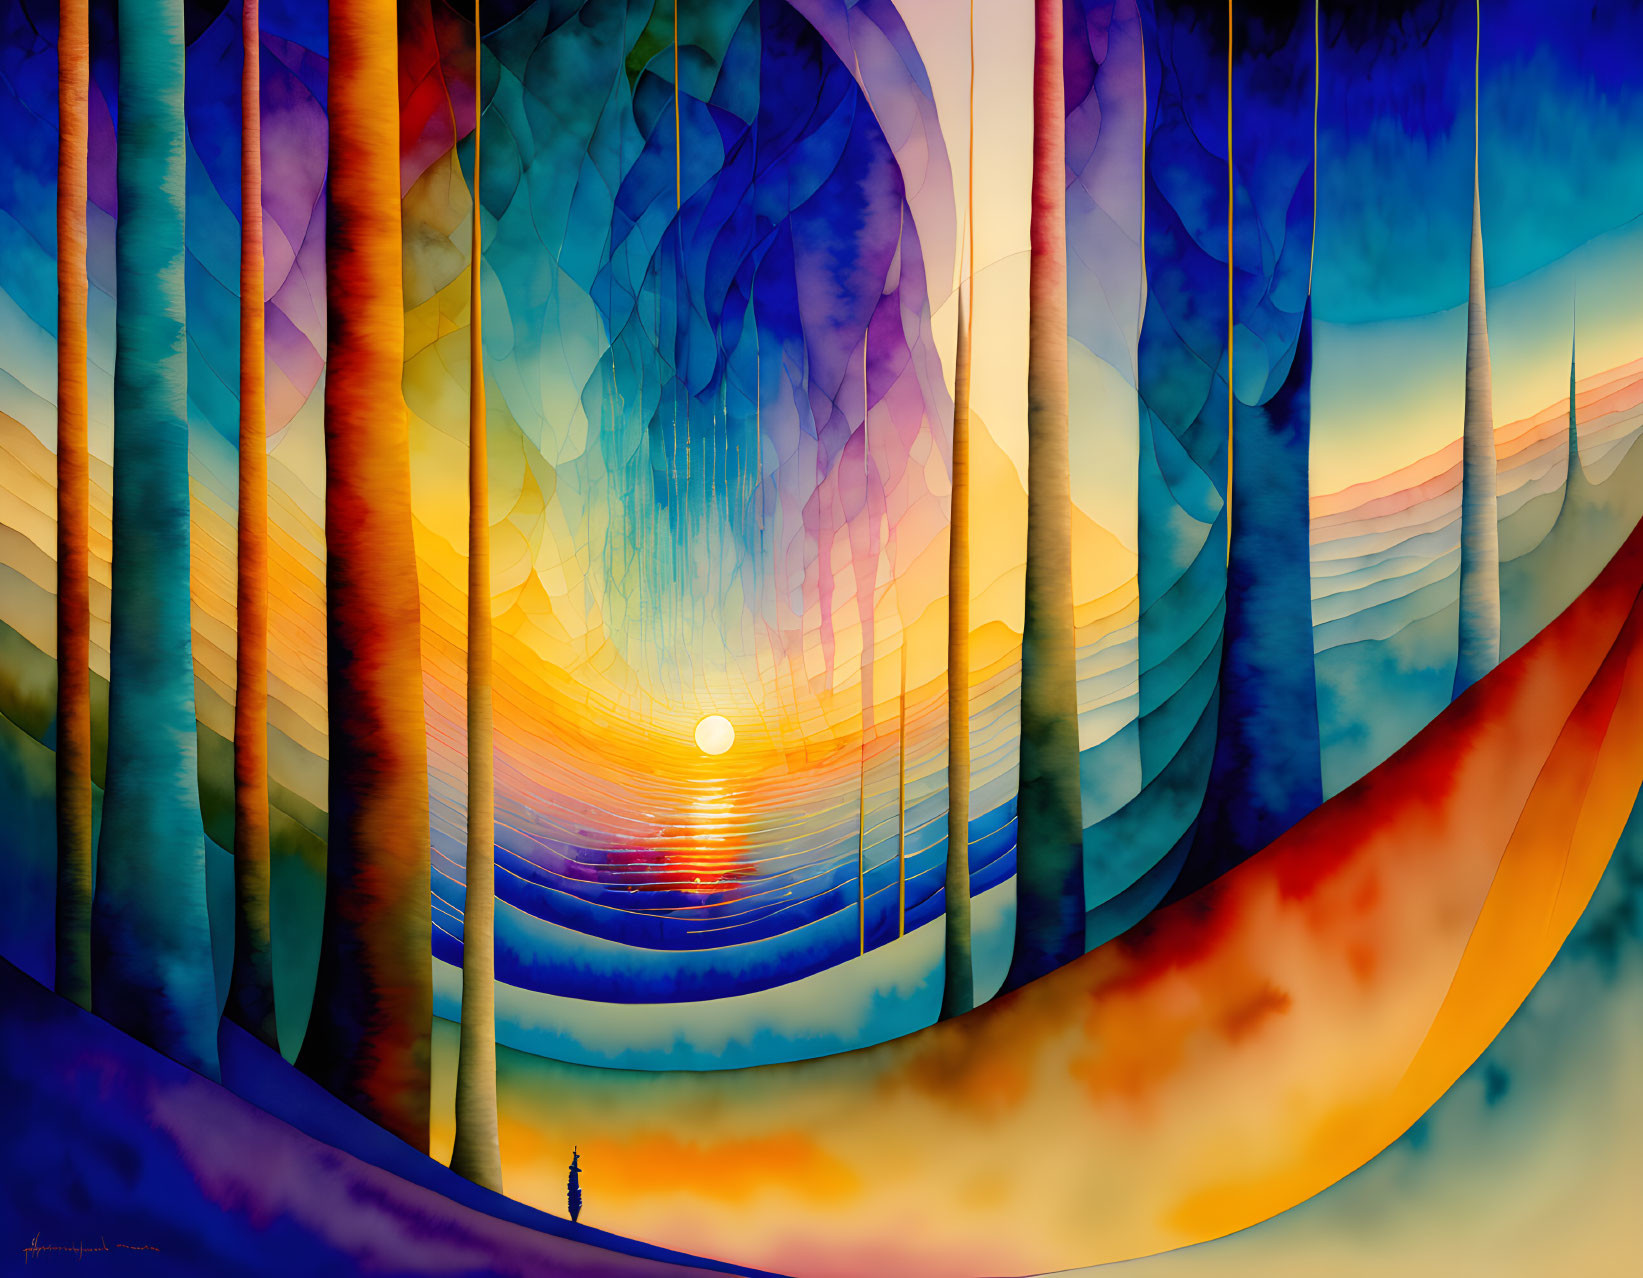 Vibrant forest painting with sunset backdrop and elongated tree trunks